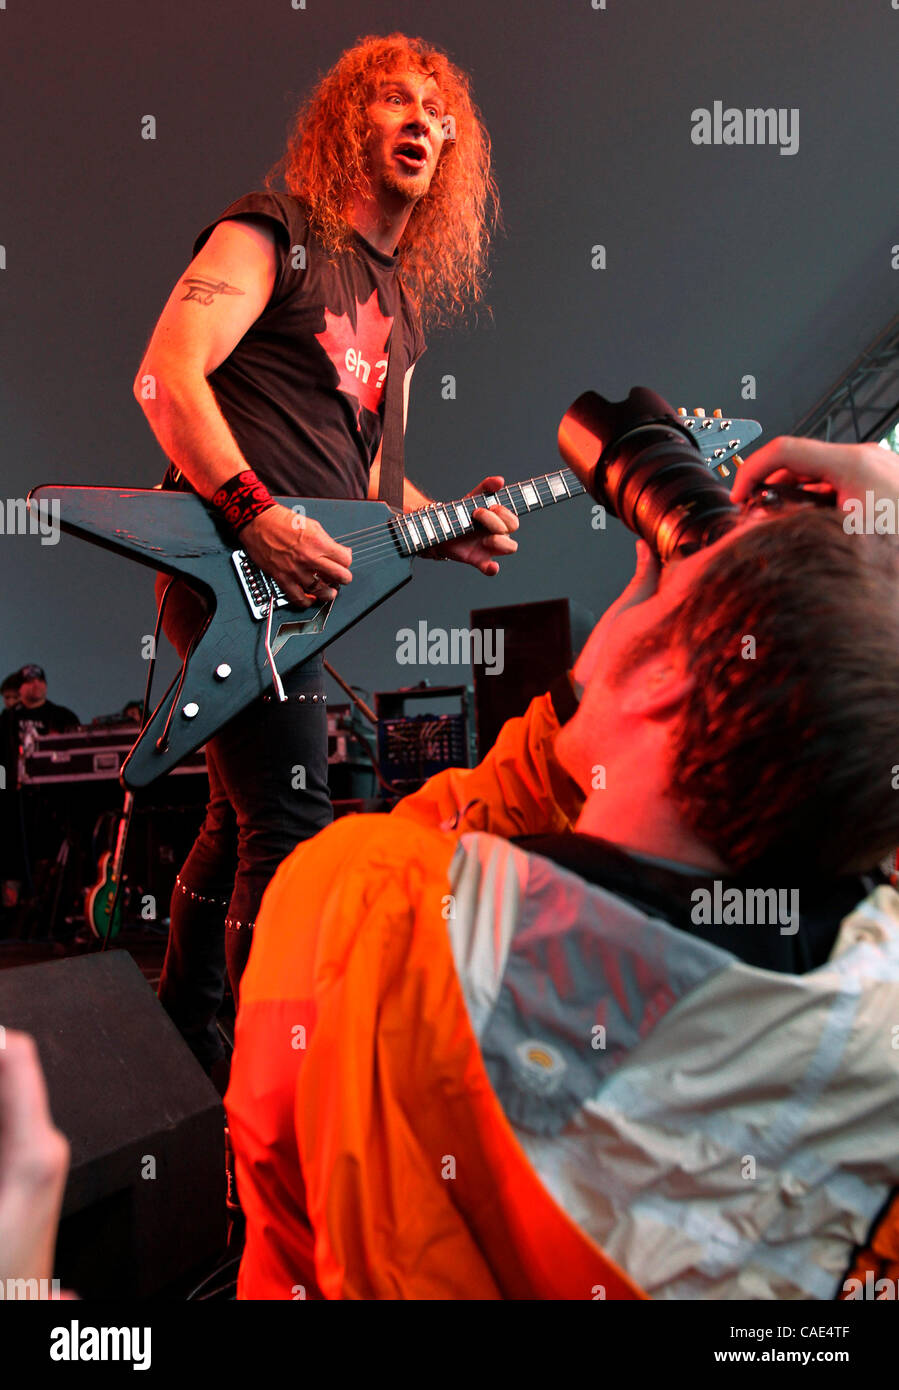 Sept. 06, 2010 - Seattle, Washington, U.S. - ANVIL lead guitarist and singer STEVE KUDLOW performs on the Center Square Stage during the third and final night of the 40th annual Bumbershoot Music and Arts Festival in Seattle, Washington. Anvil is one of more than 200 international artists performing Stock Photo